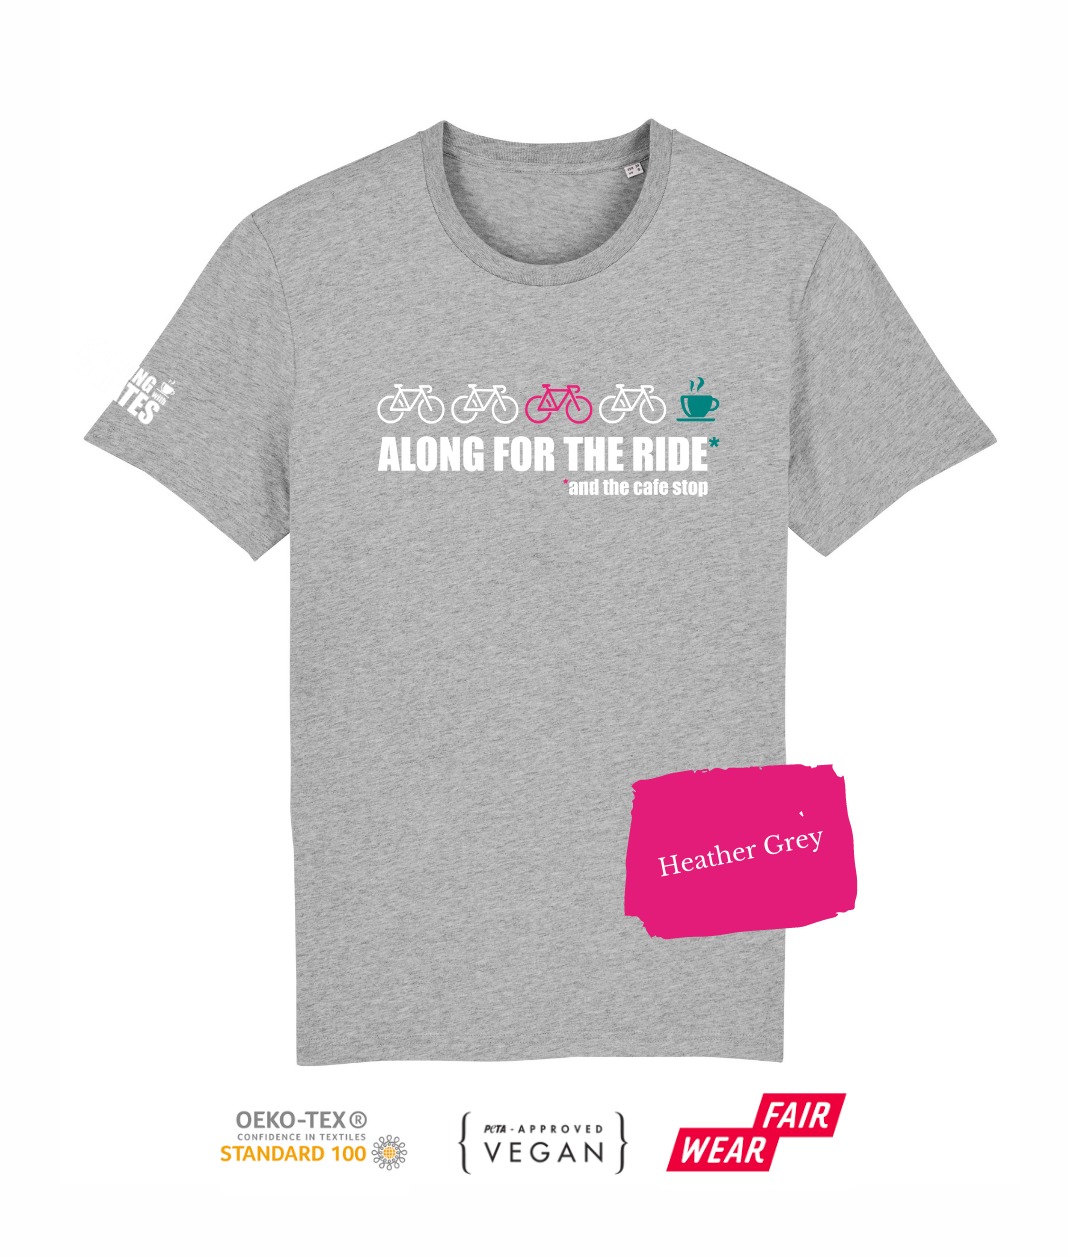 Along For The Ride (and the cafe stop) t-shirt